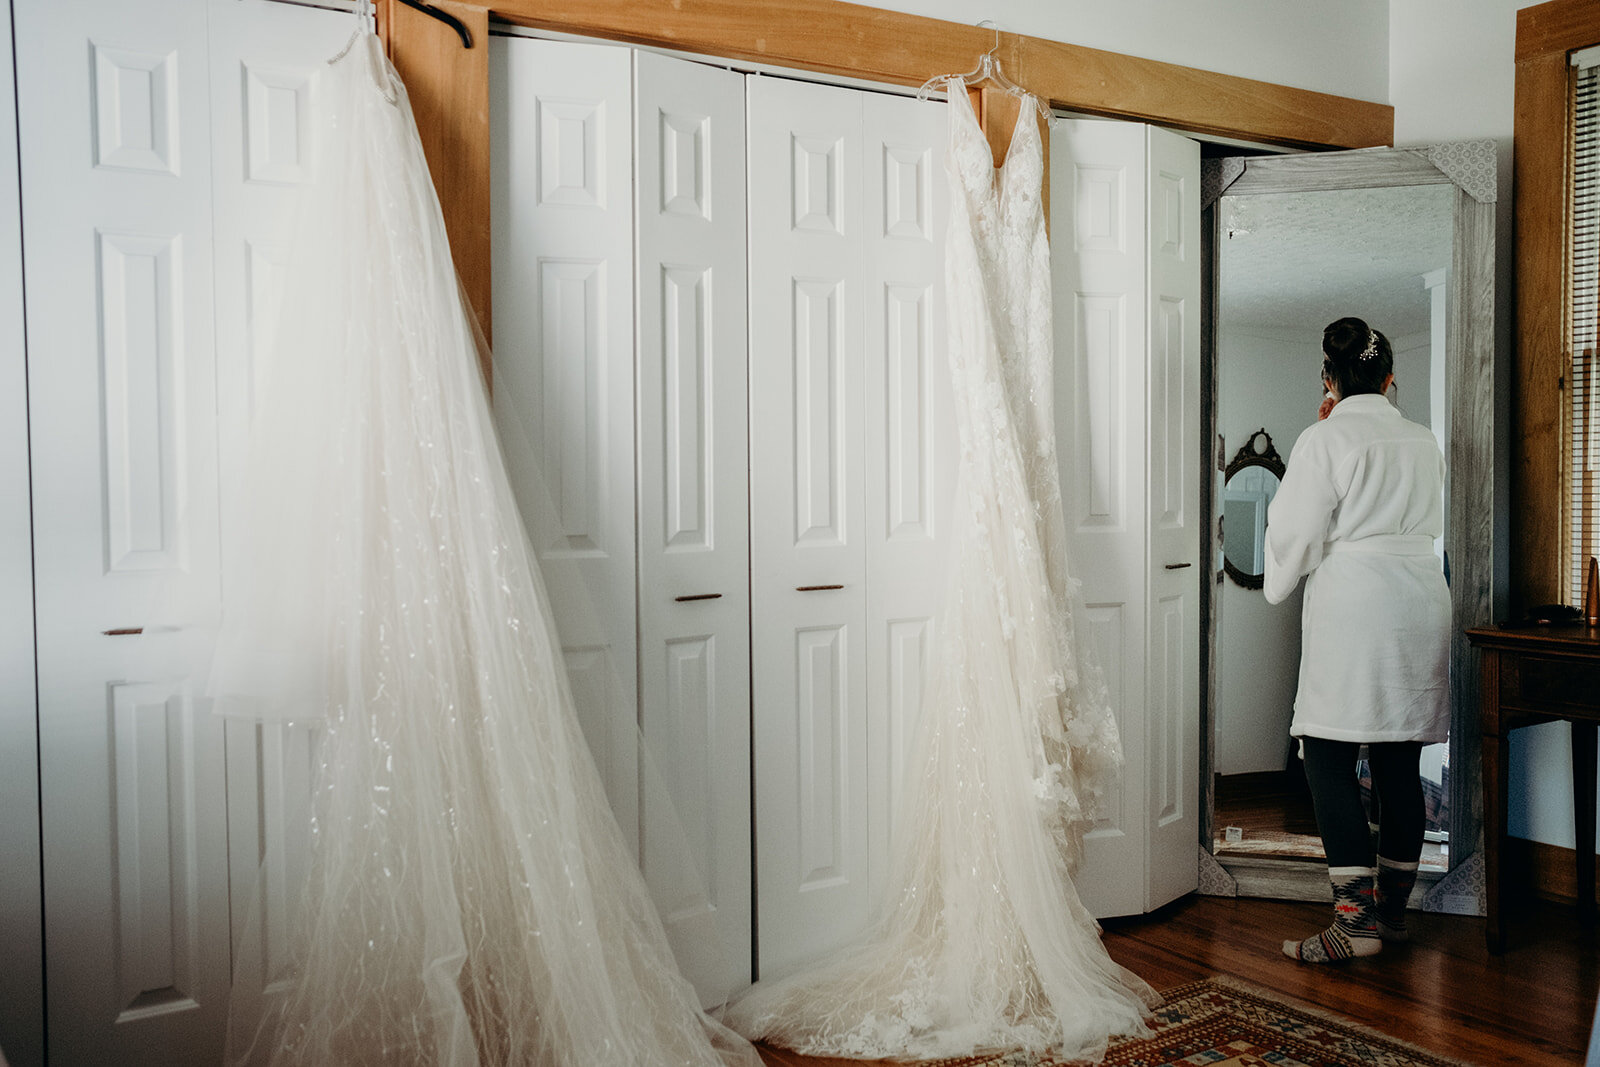 A bride peeks in the mirror while her wedding dress and overskirt hang nearby.